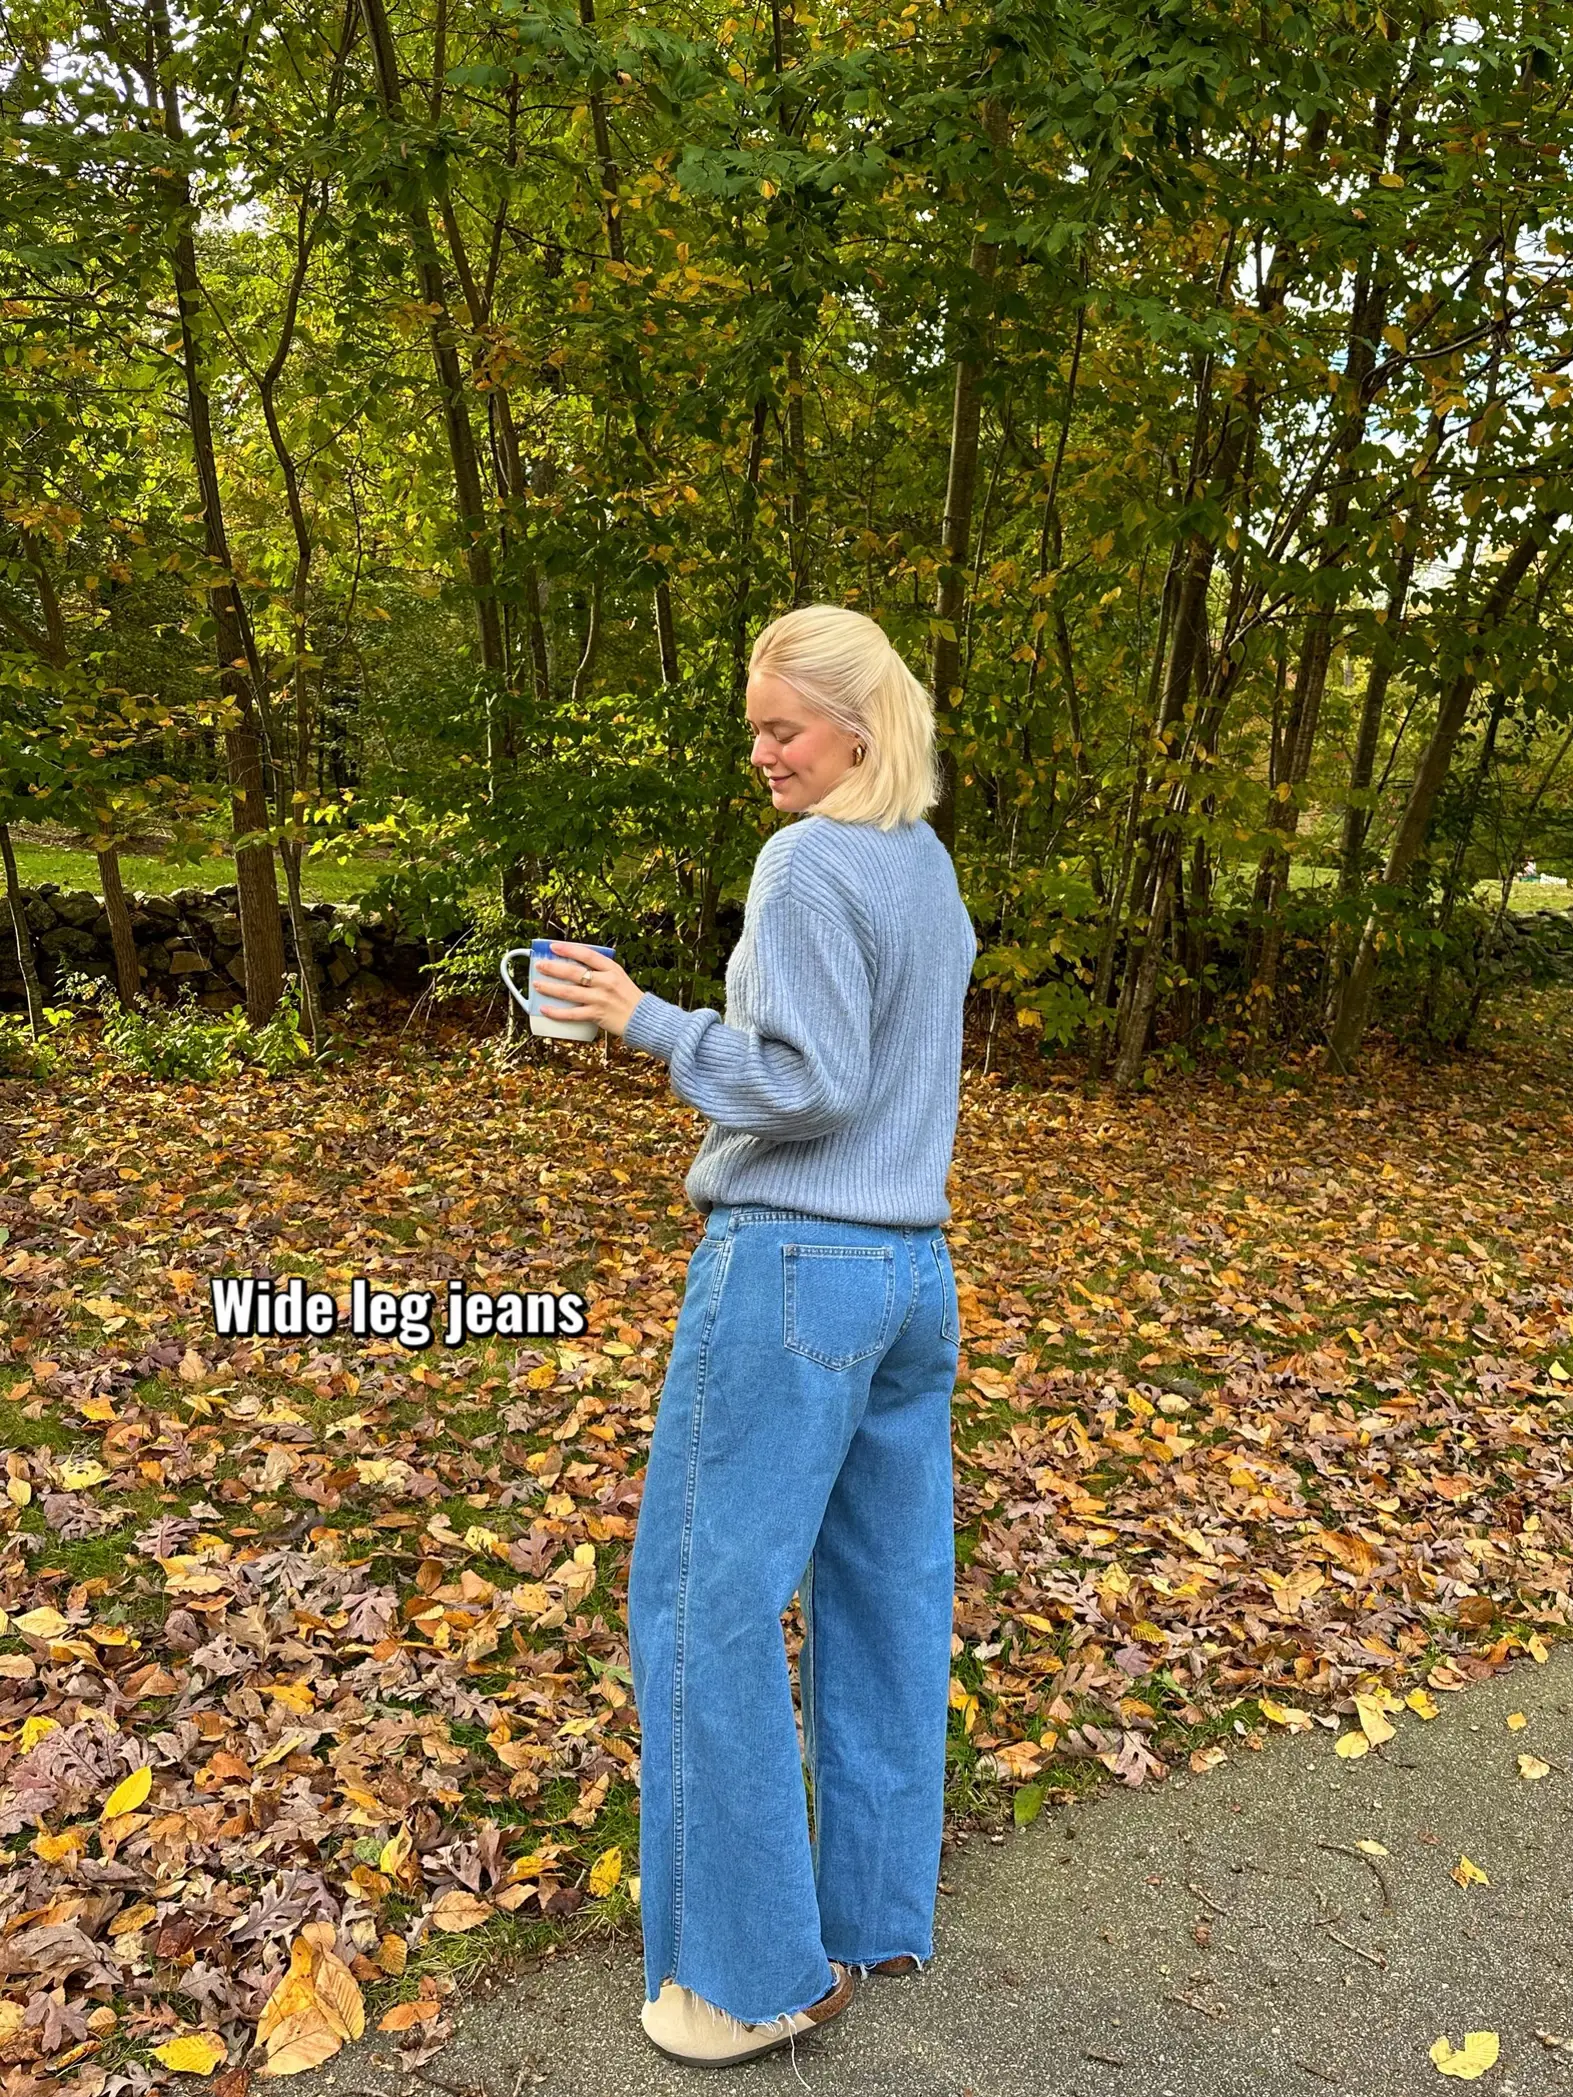  A woman wearing a sweater and jeans is standing in a field.